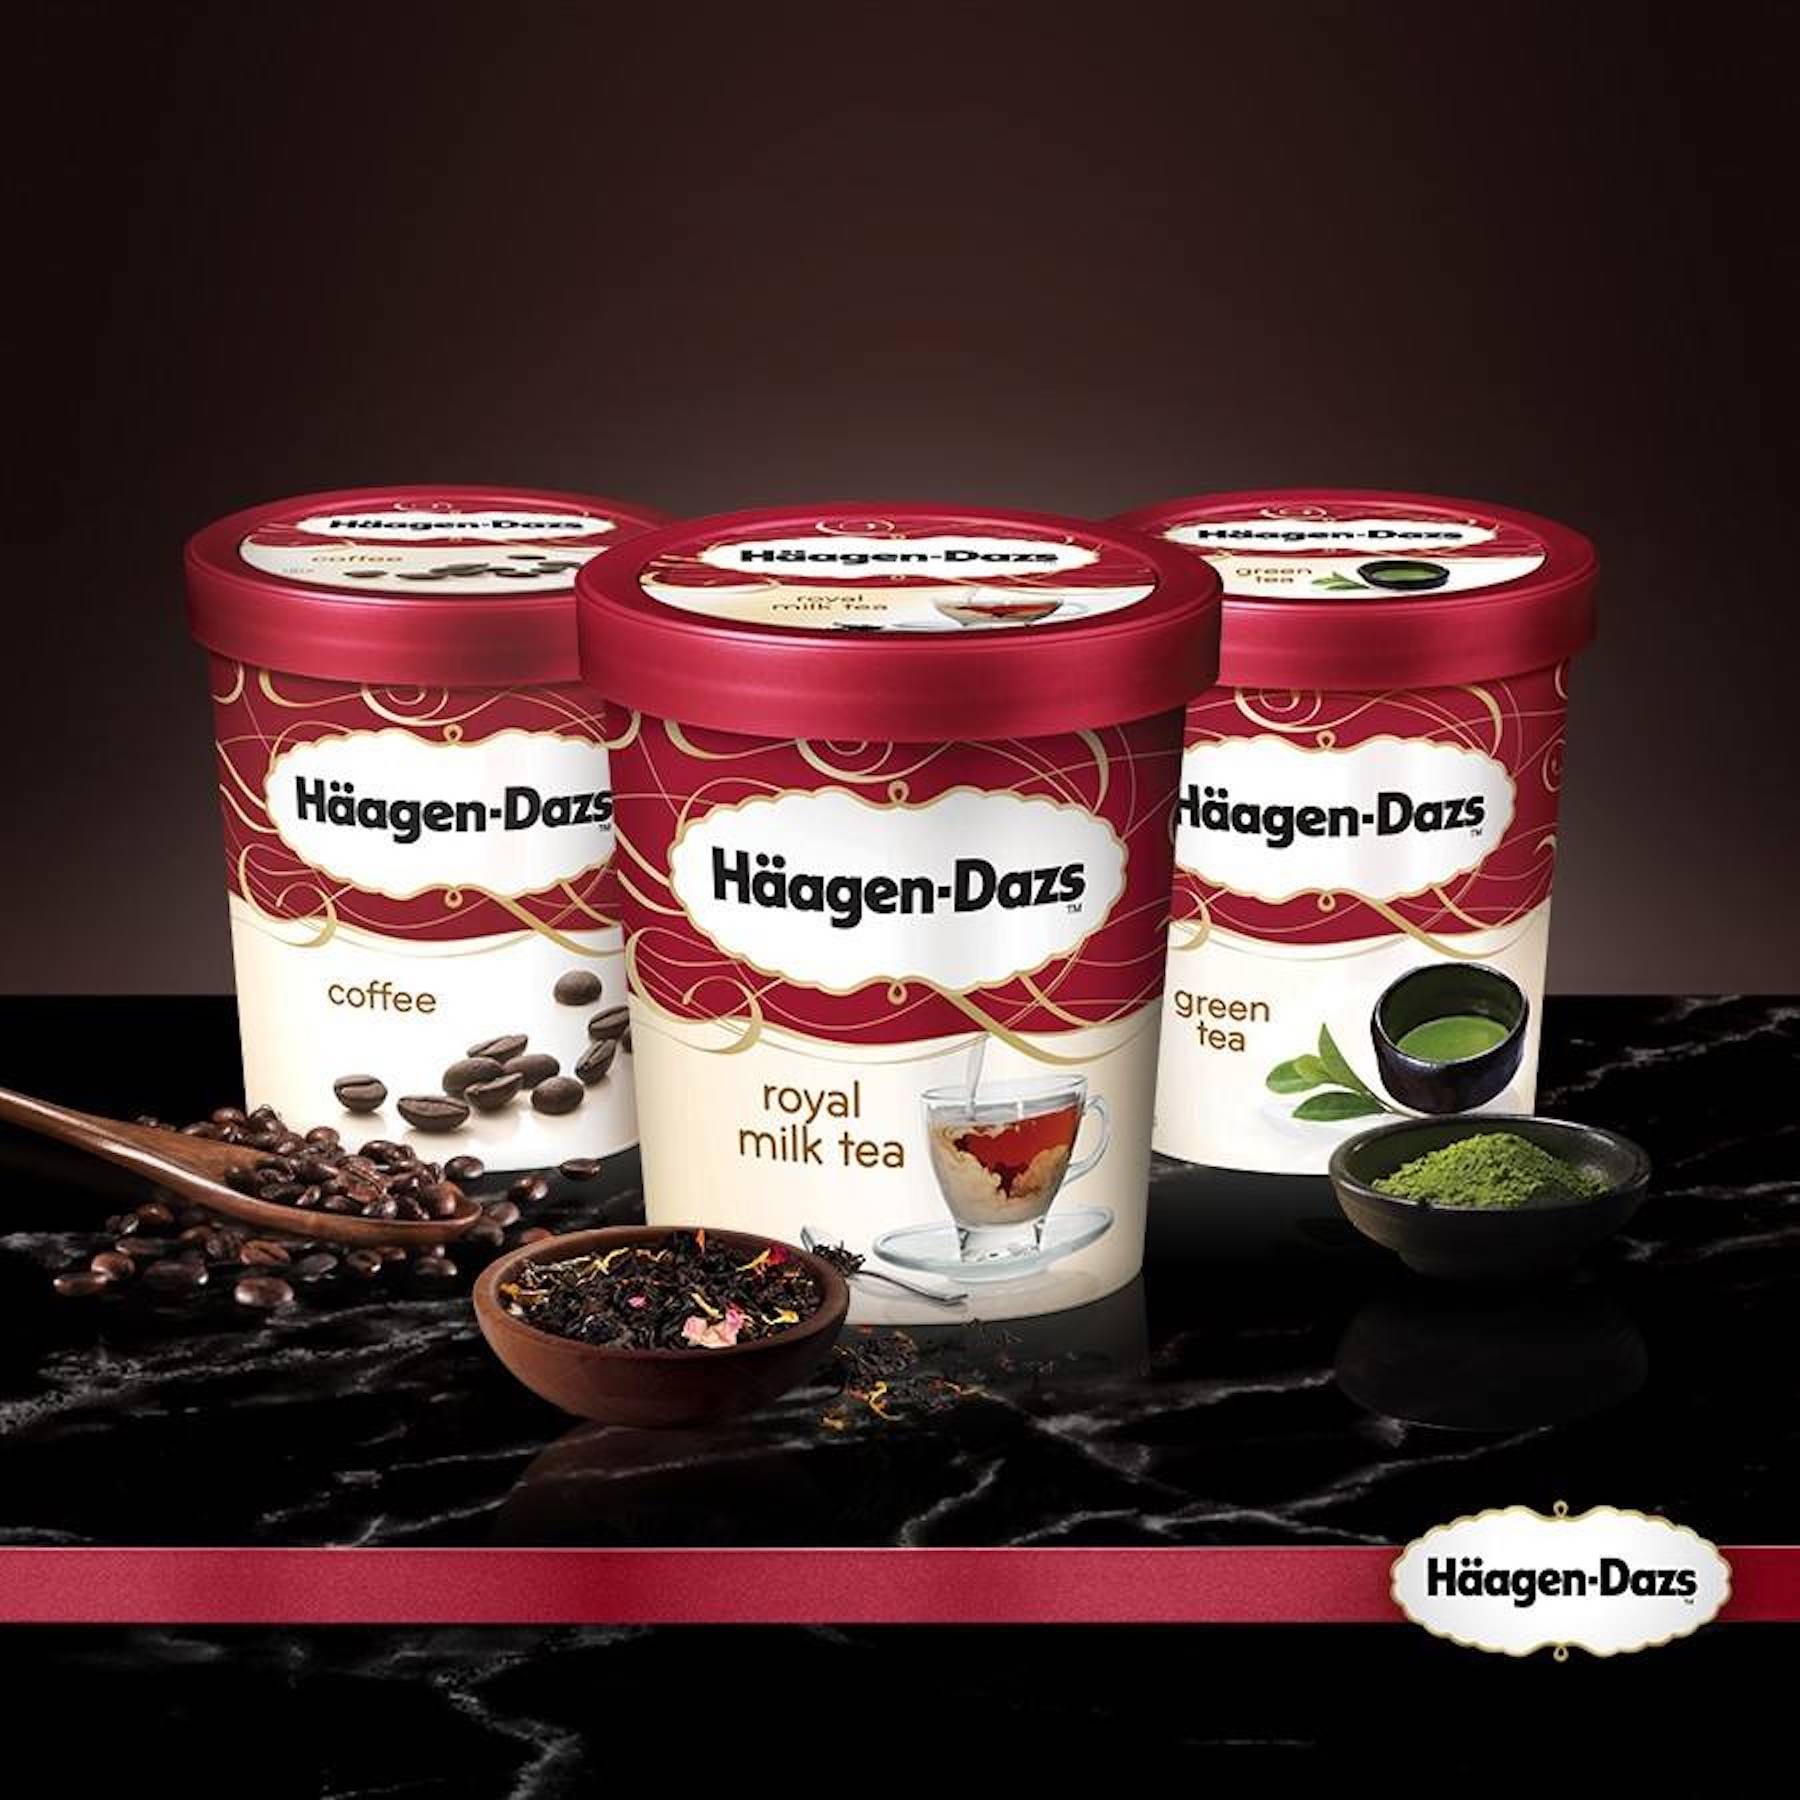 Haagen-Dazs. you can save up to $10 and enjoy 2 tubs of Haagen-Dazs ice-cre...